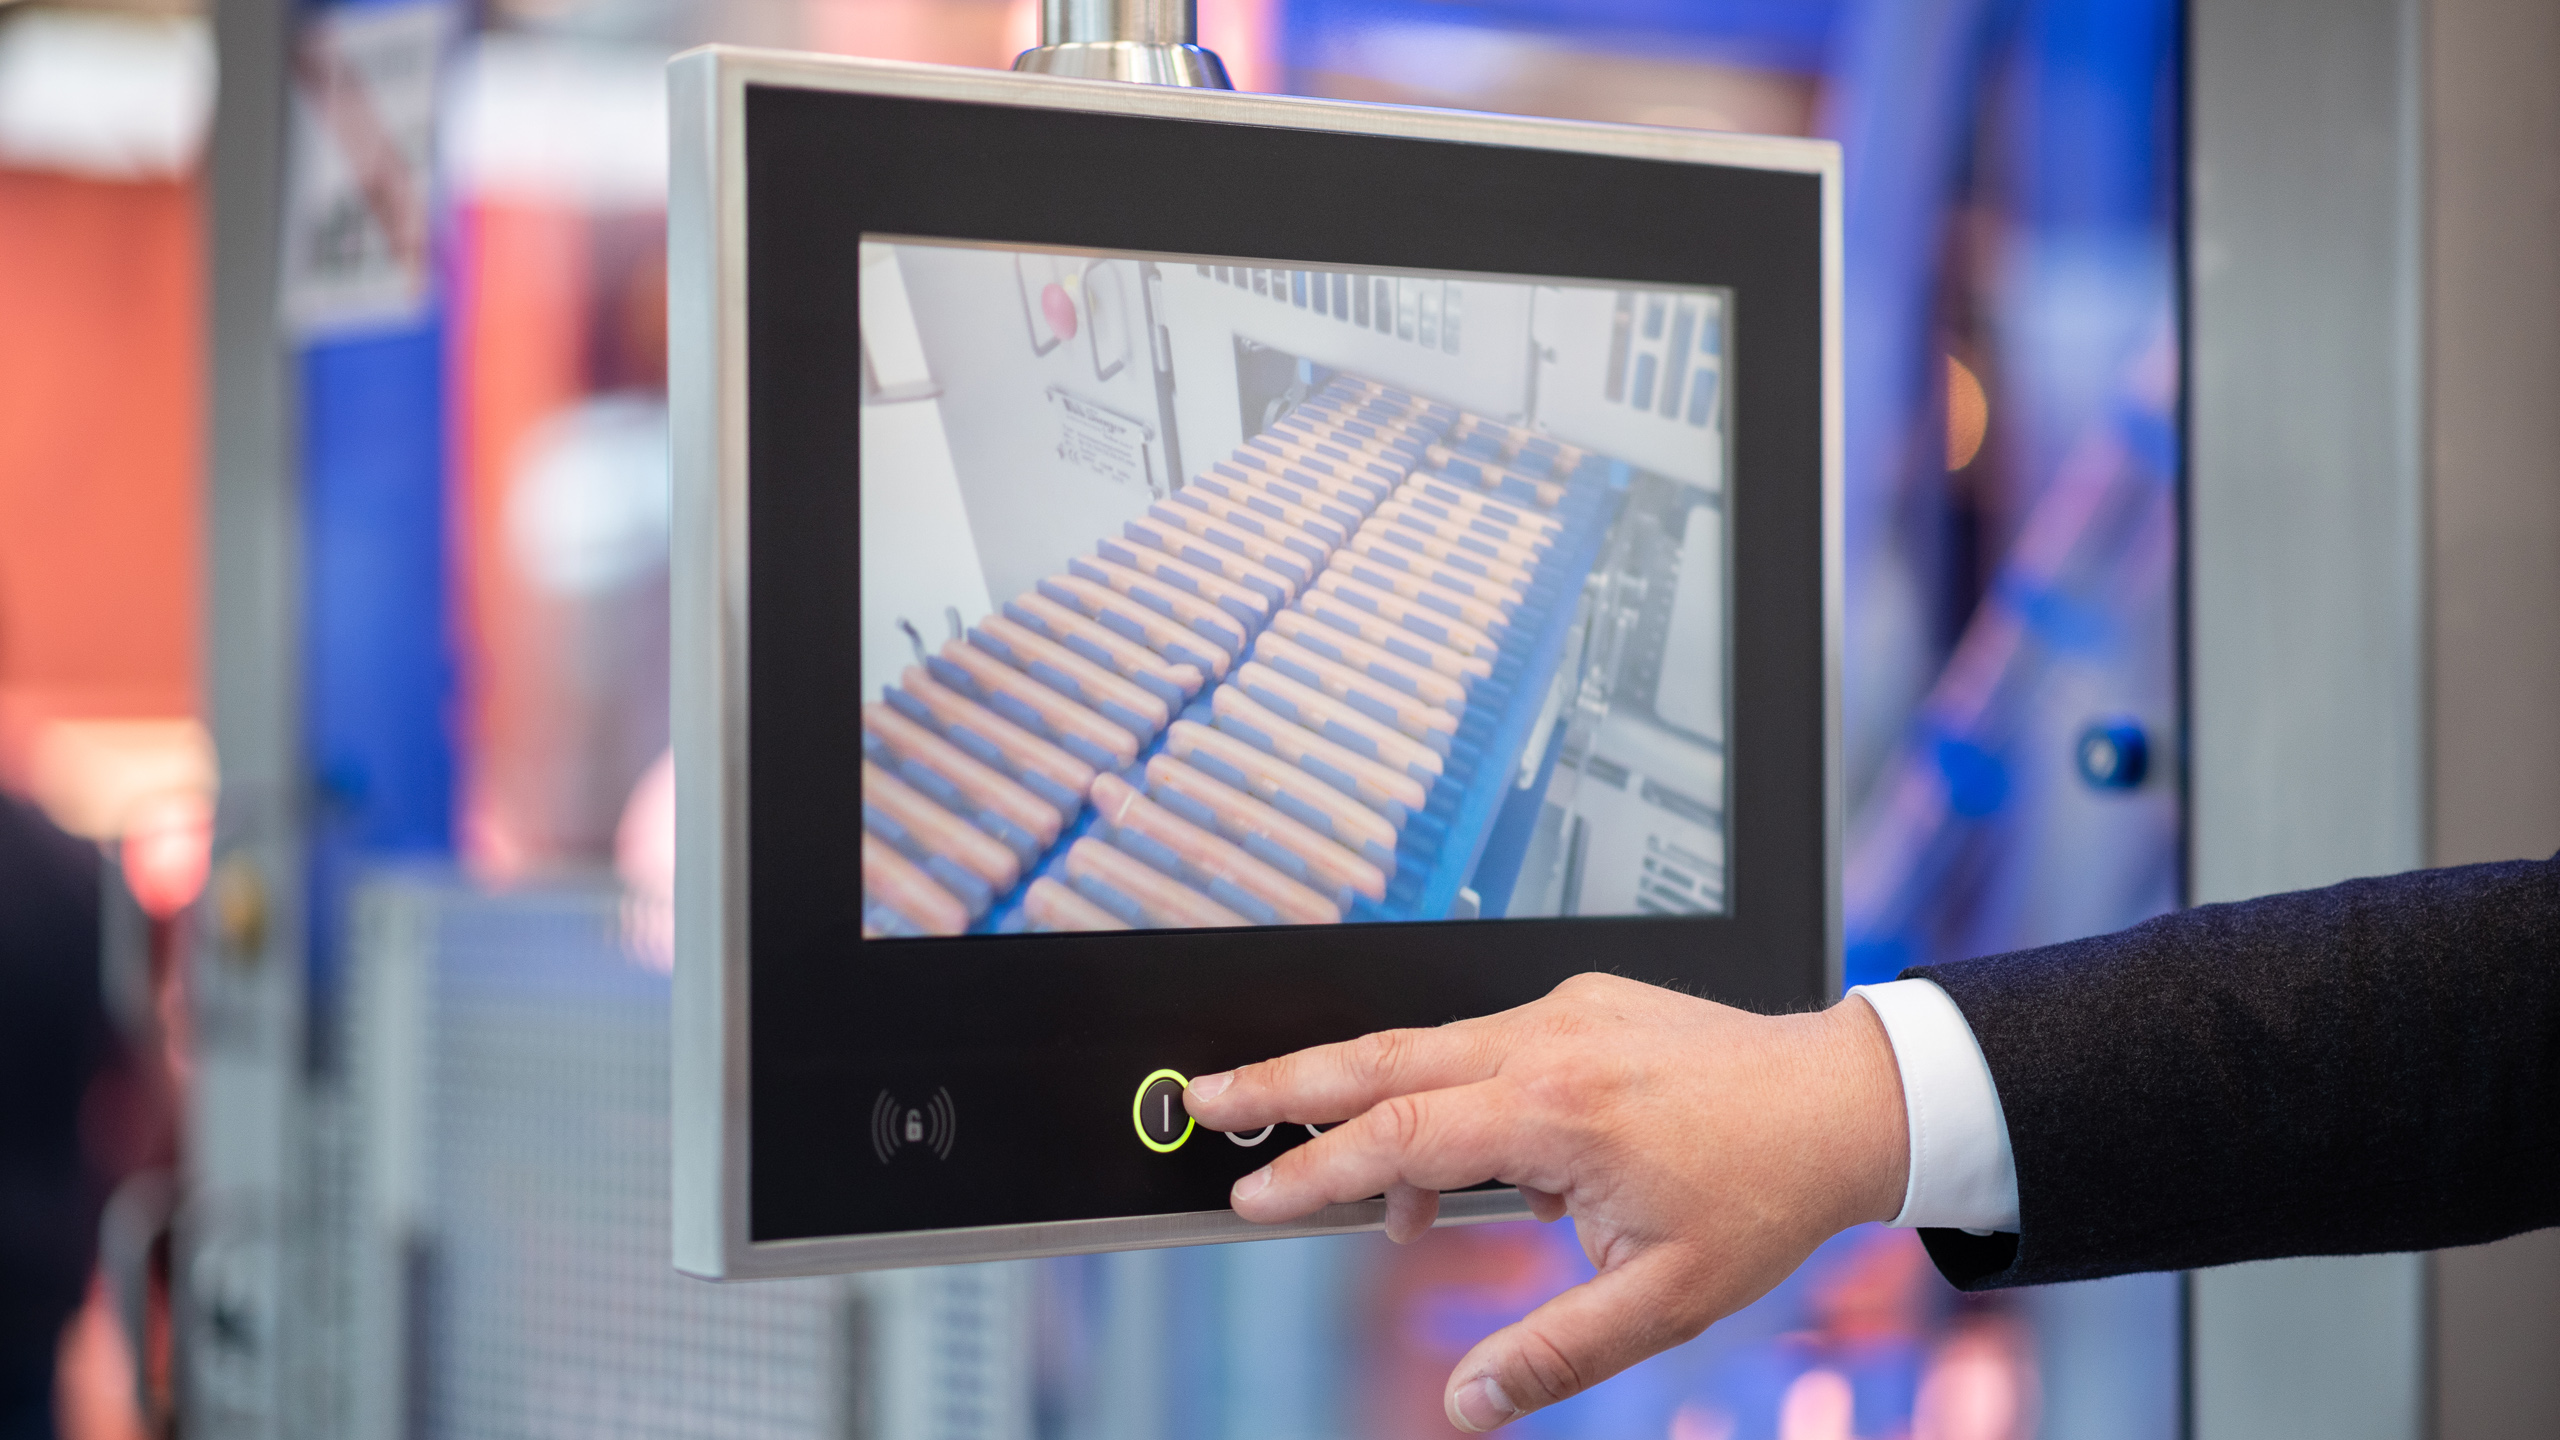 Monitoring the plant in real time increases safety. (Copyright: Messe Frankfurt)